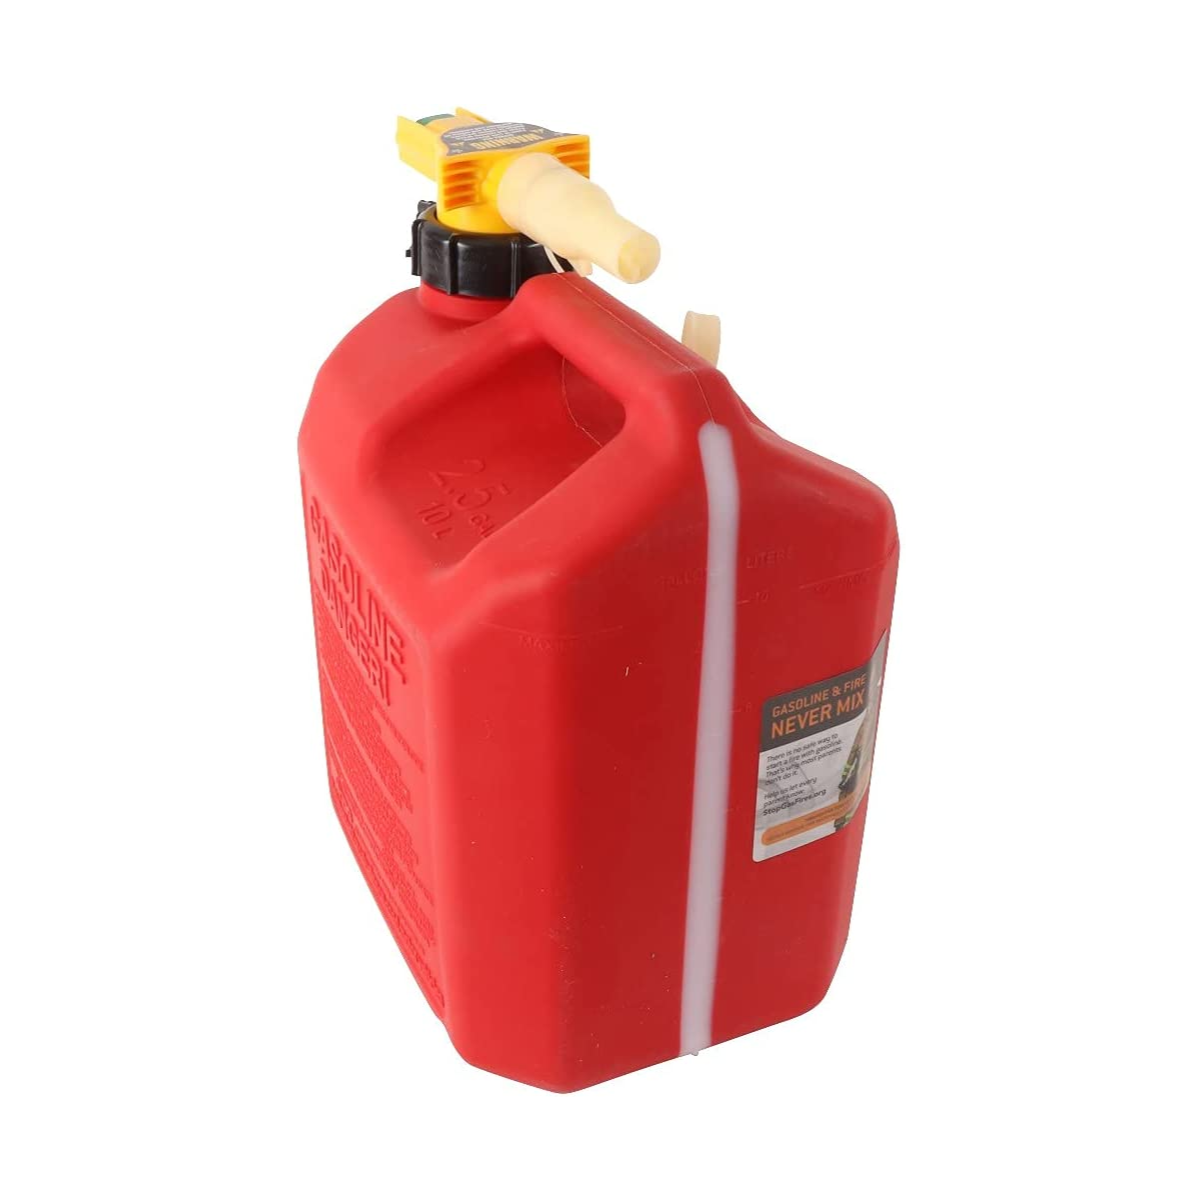 No-Spill Premium Petrol Fuel Jerry Can with Spill-Proof Nozzle - 10L - RDO Equipment